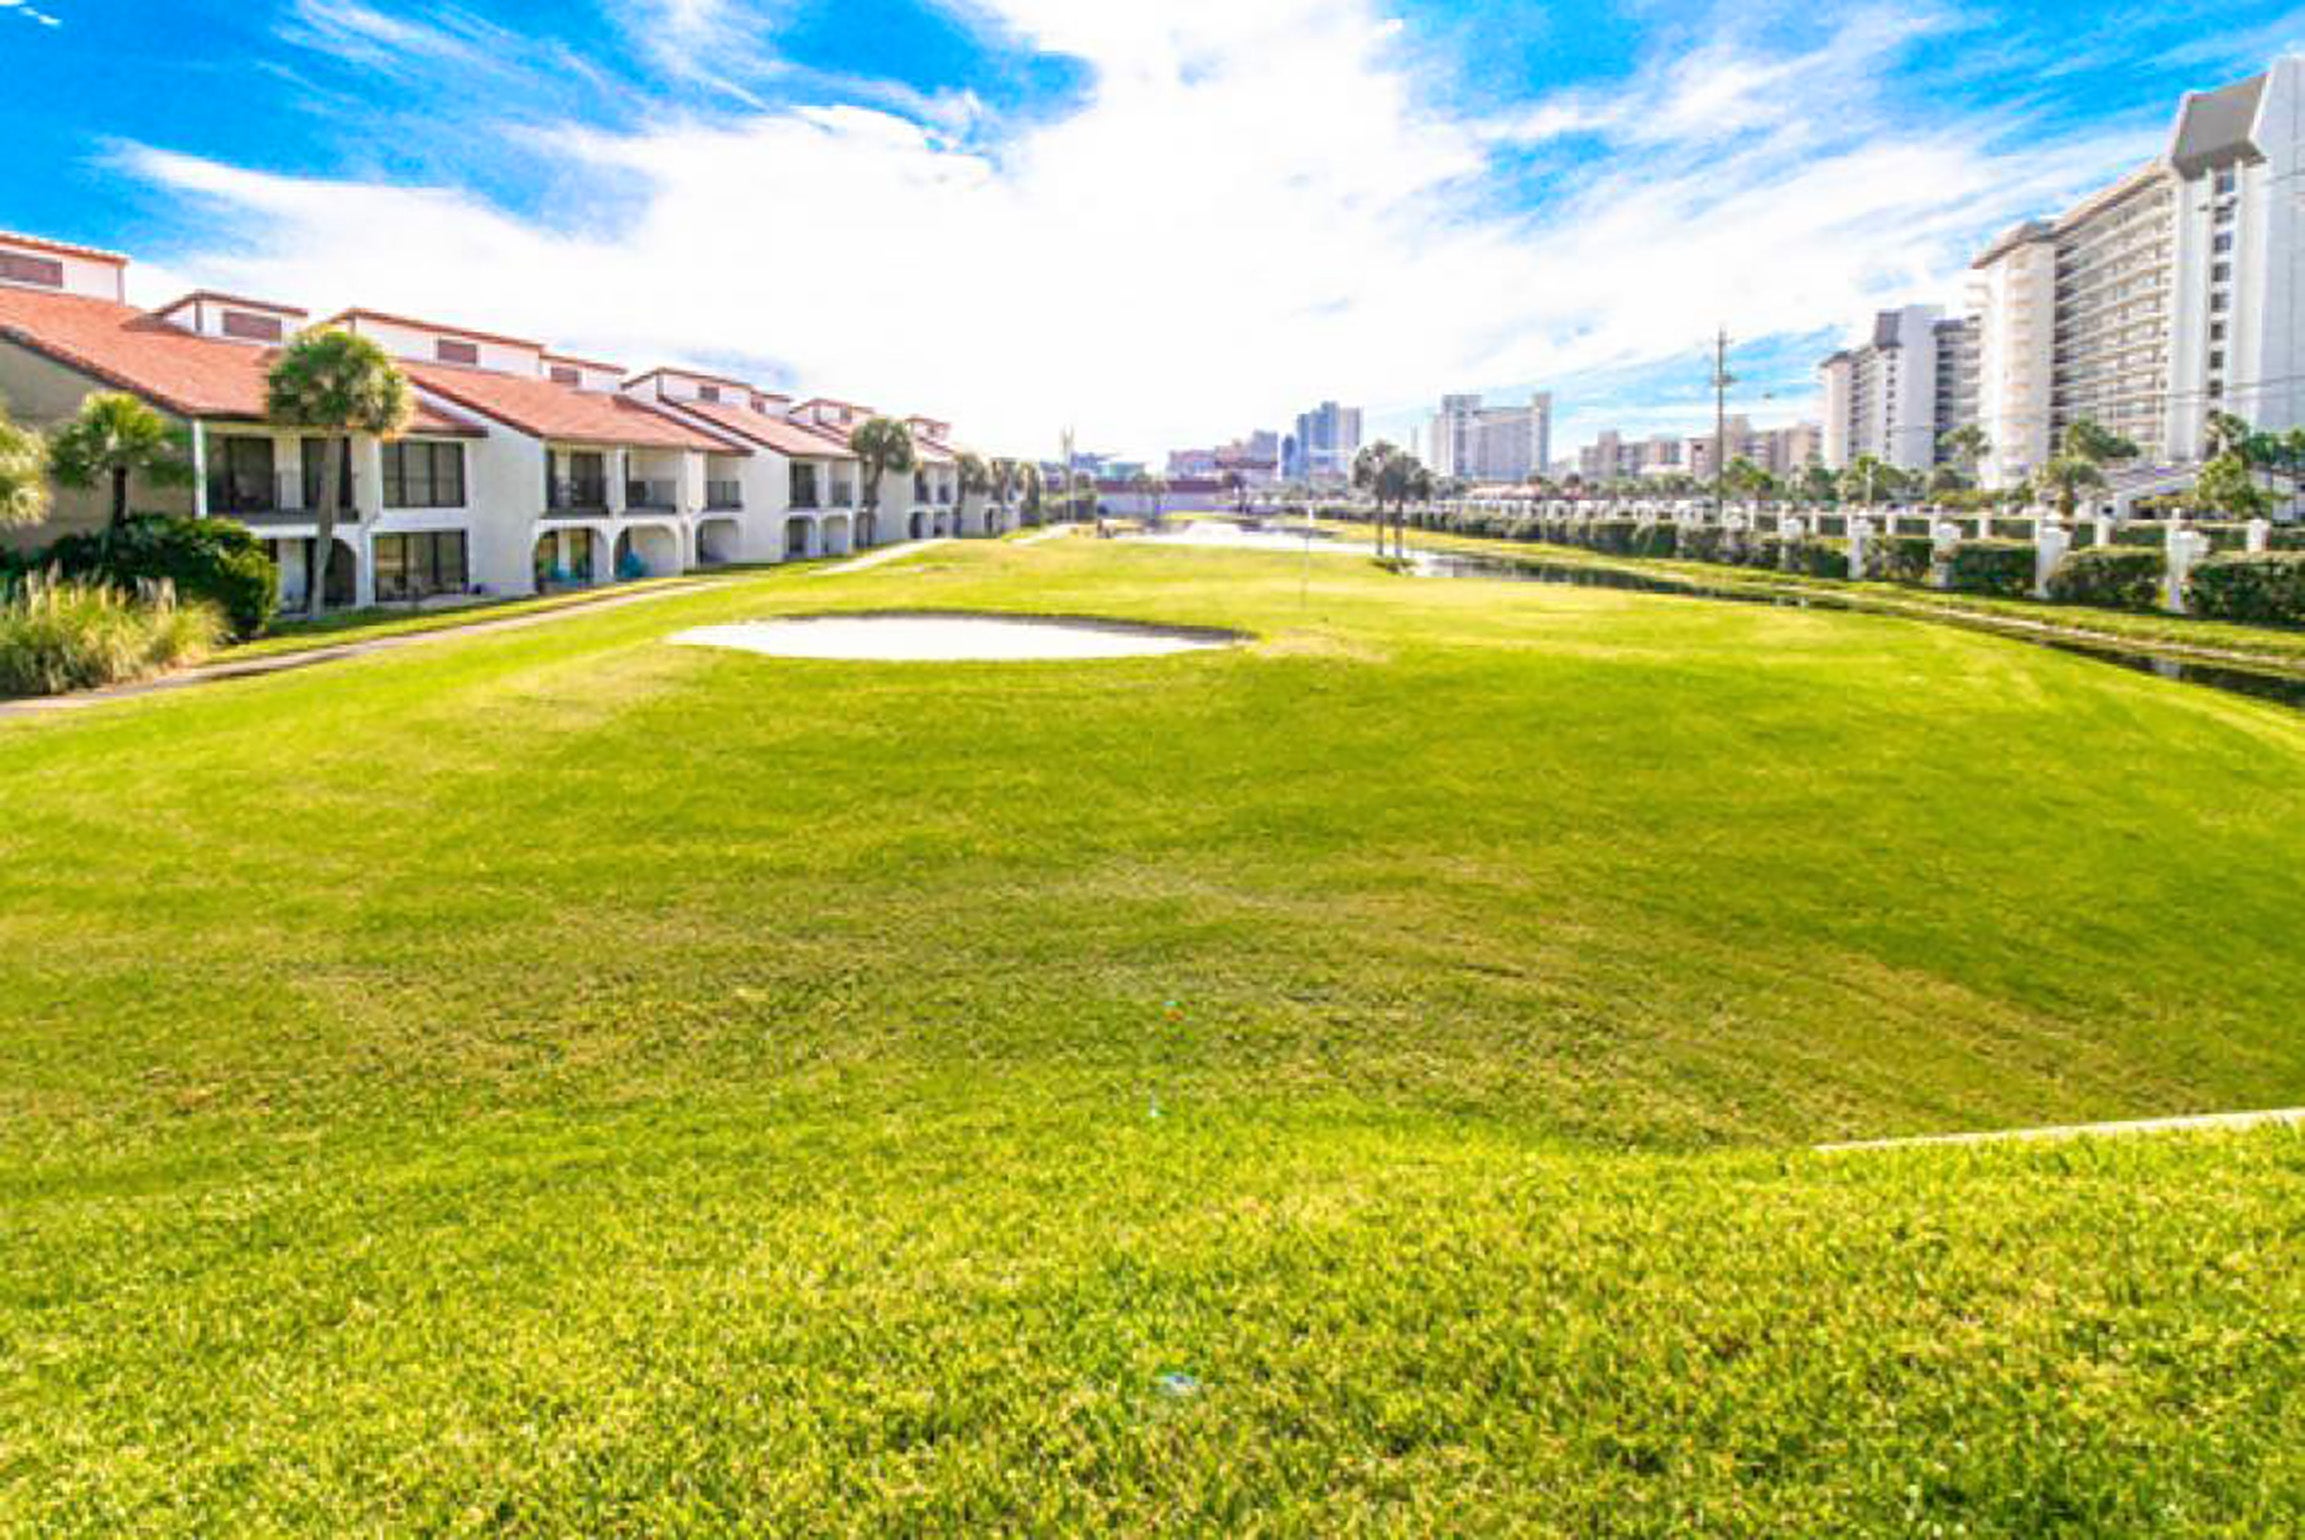 Golf+Course+at+Edgewater+Resort+